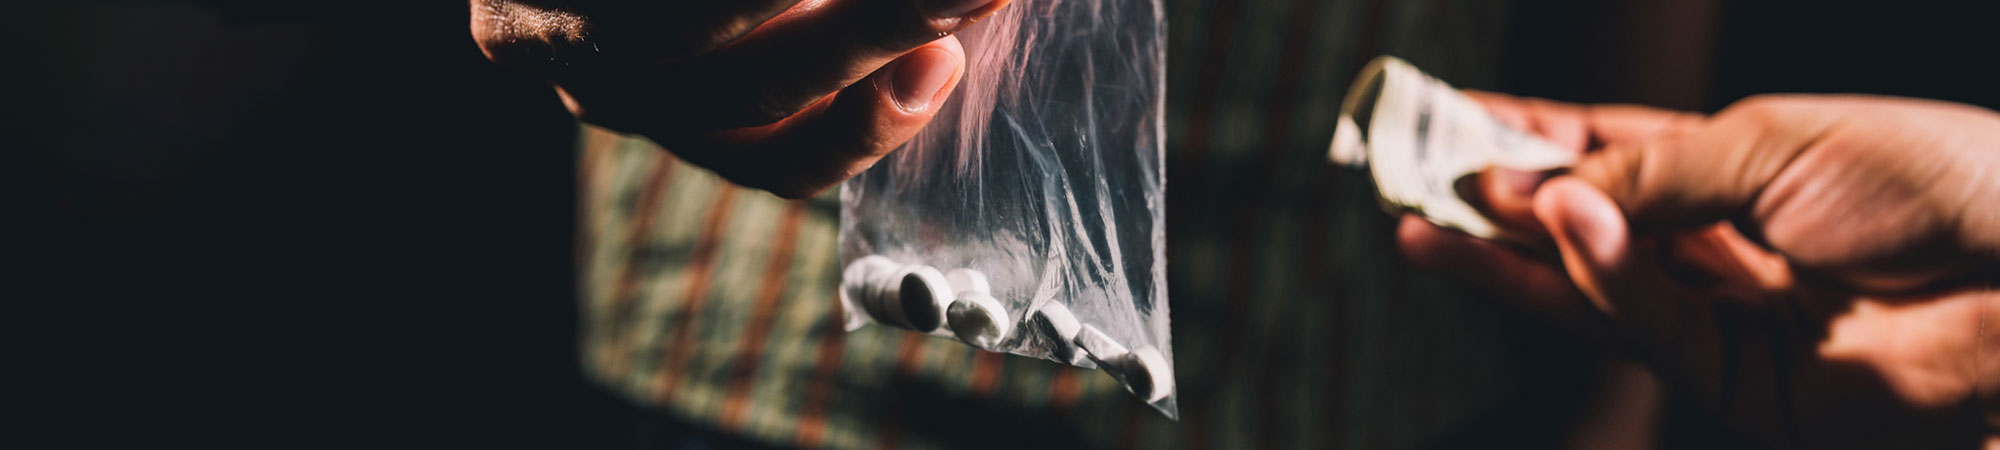 A close-up image of a person holding a small zip-lock bag with pills while another hand holds cash, focusing on an apparent transaction in dim lighting.